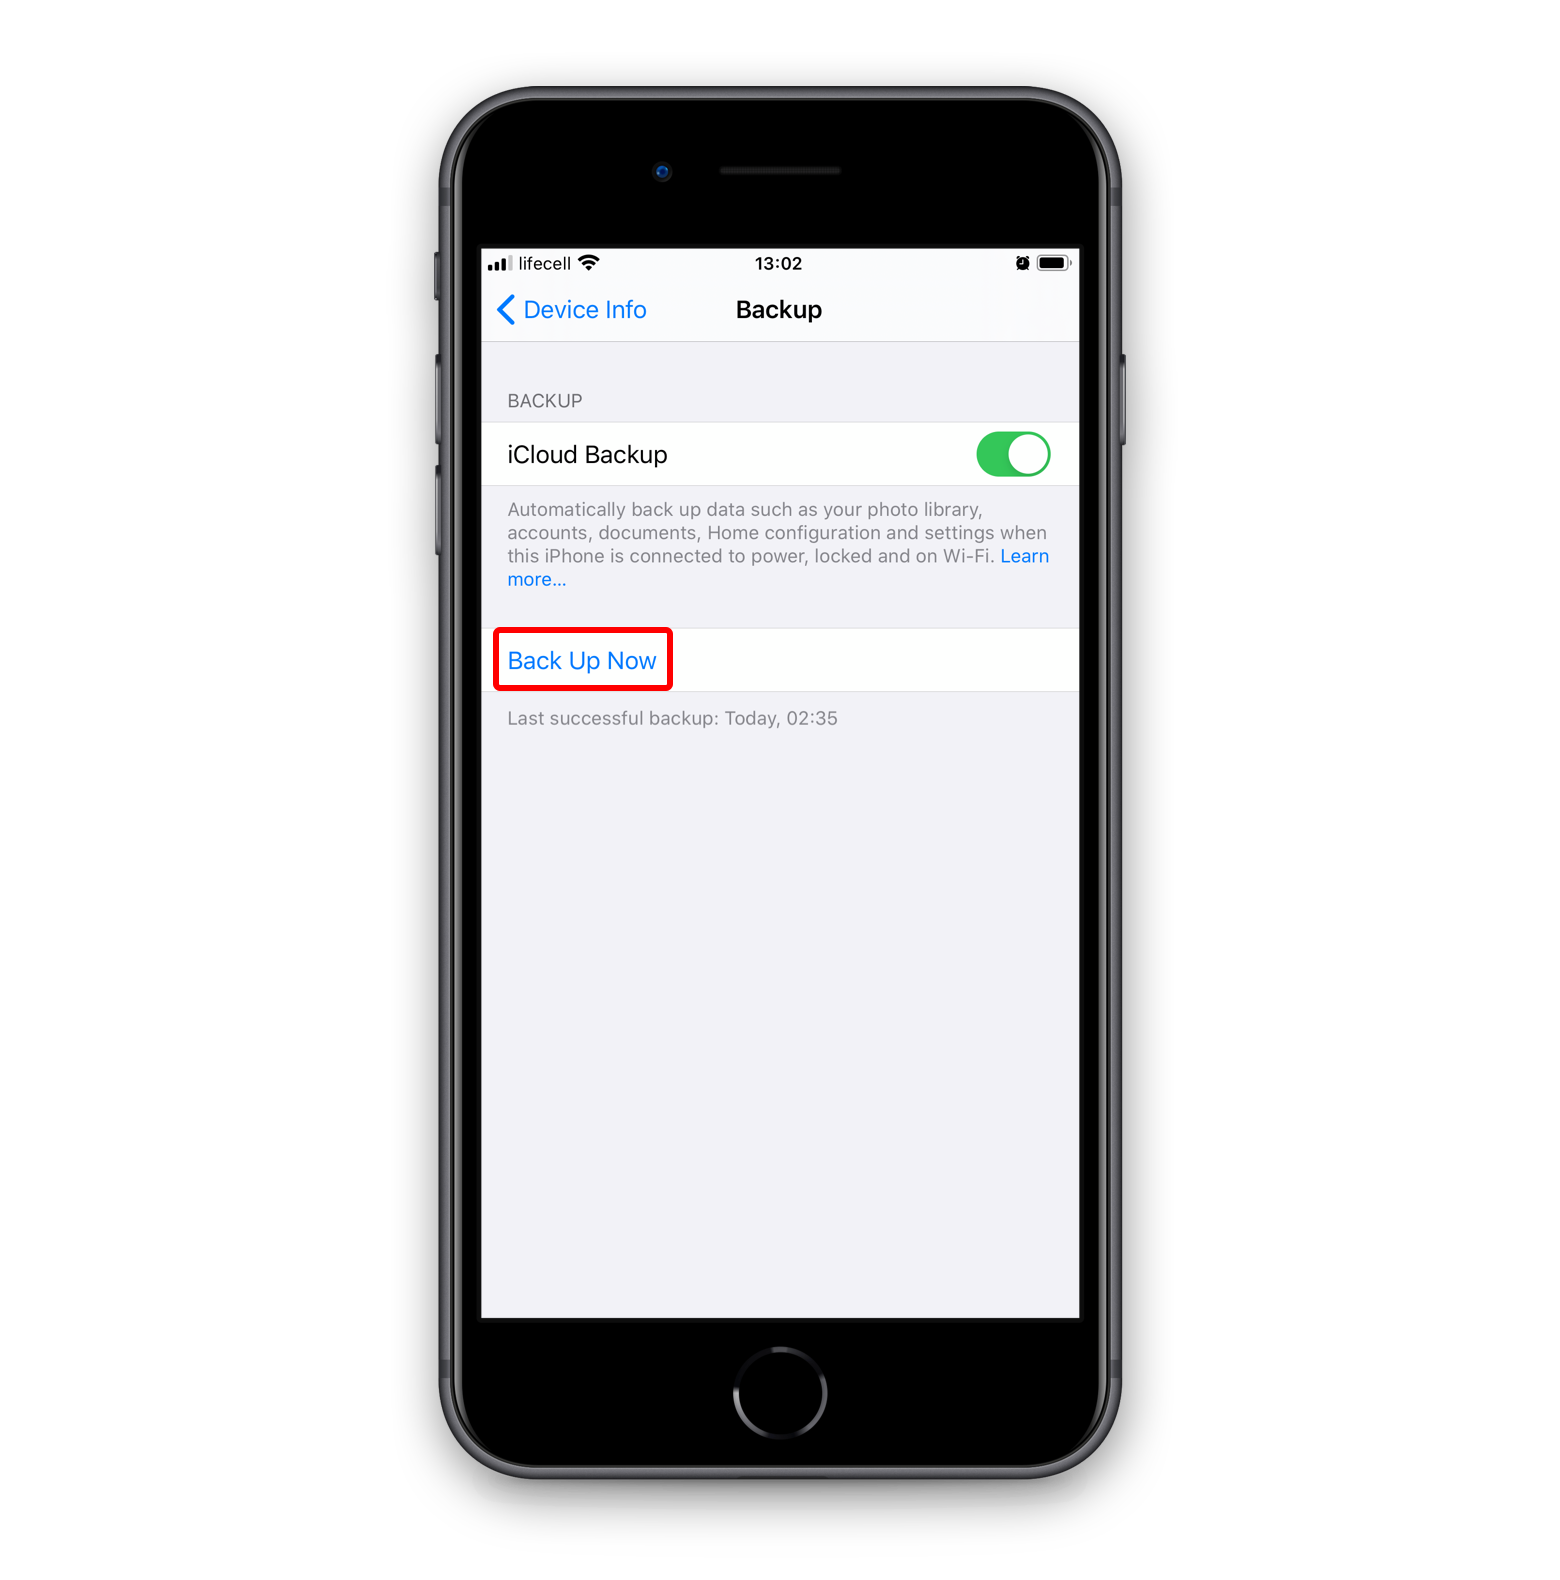 A complete guide on how to factory reset iPhone - Setapp